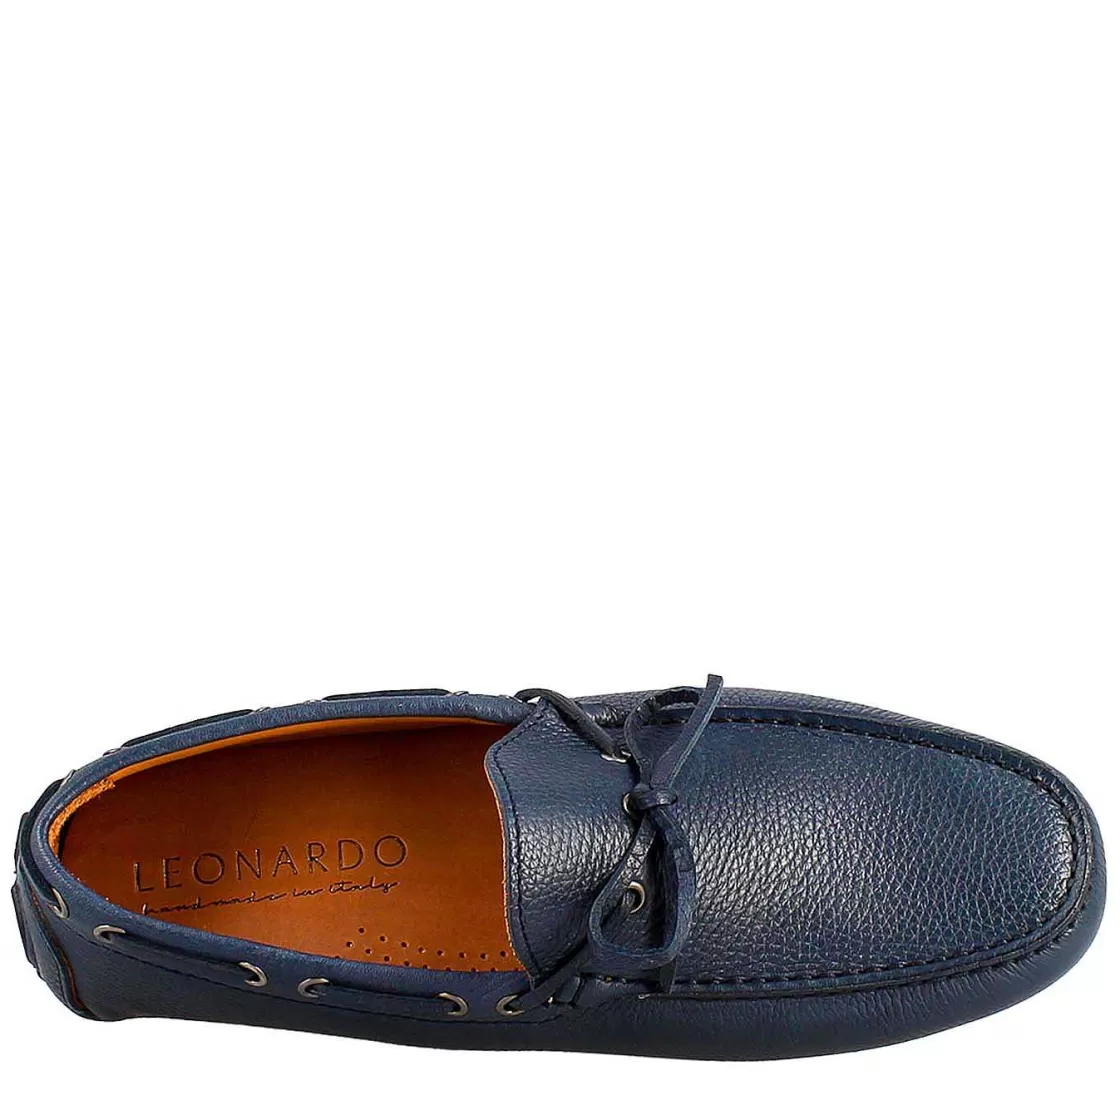 Leonardo Tubular Moccasin With Laces For Men In Blue Leather Sale